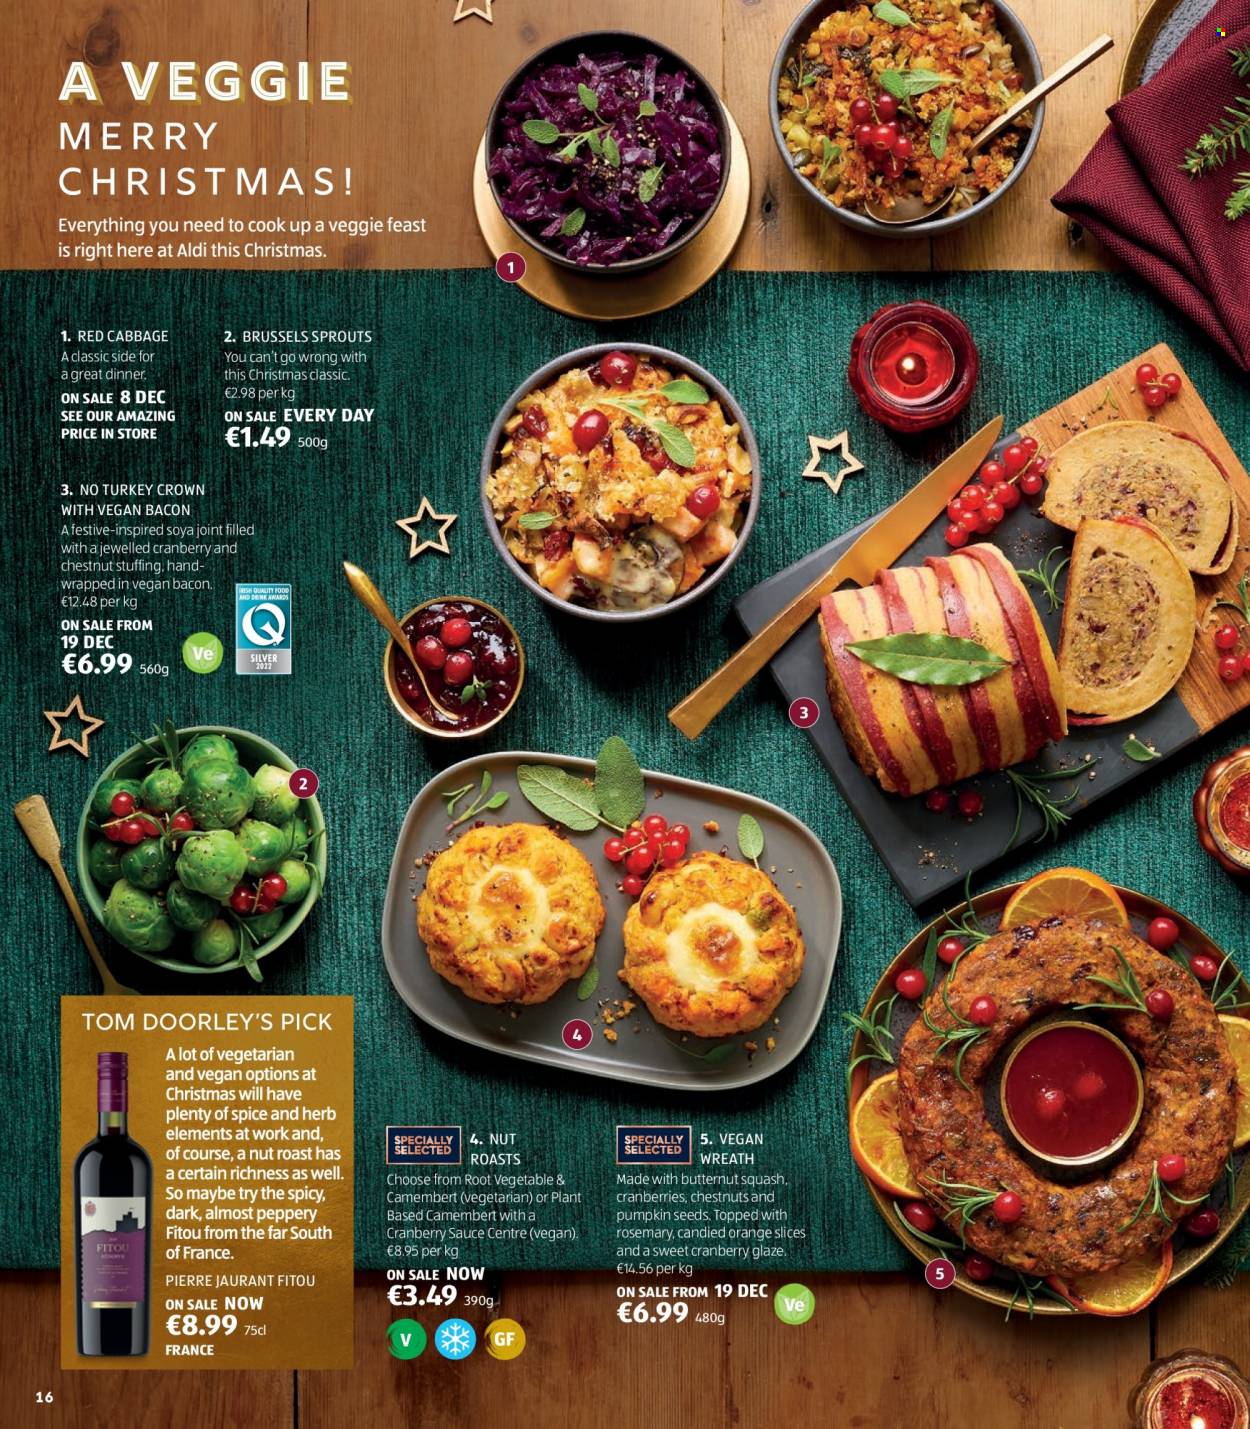 thumbnail - Aldi offer  - Sales products - butternut squash, cabbage, brussel sprouts, oranges, sauce, bacon, camembert, cranberries, rosemary, spice, herbs, cranberry sauce, chestnuts, pumpkin seeds, turkey crown, Plenty. Page 16.